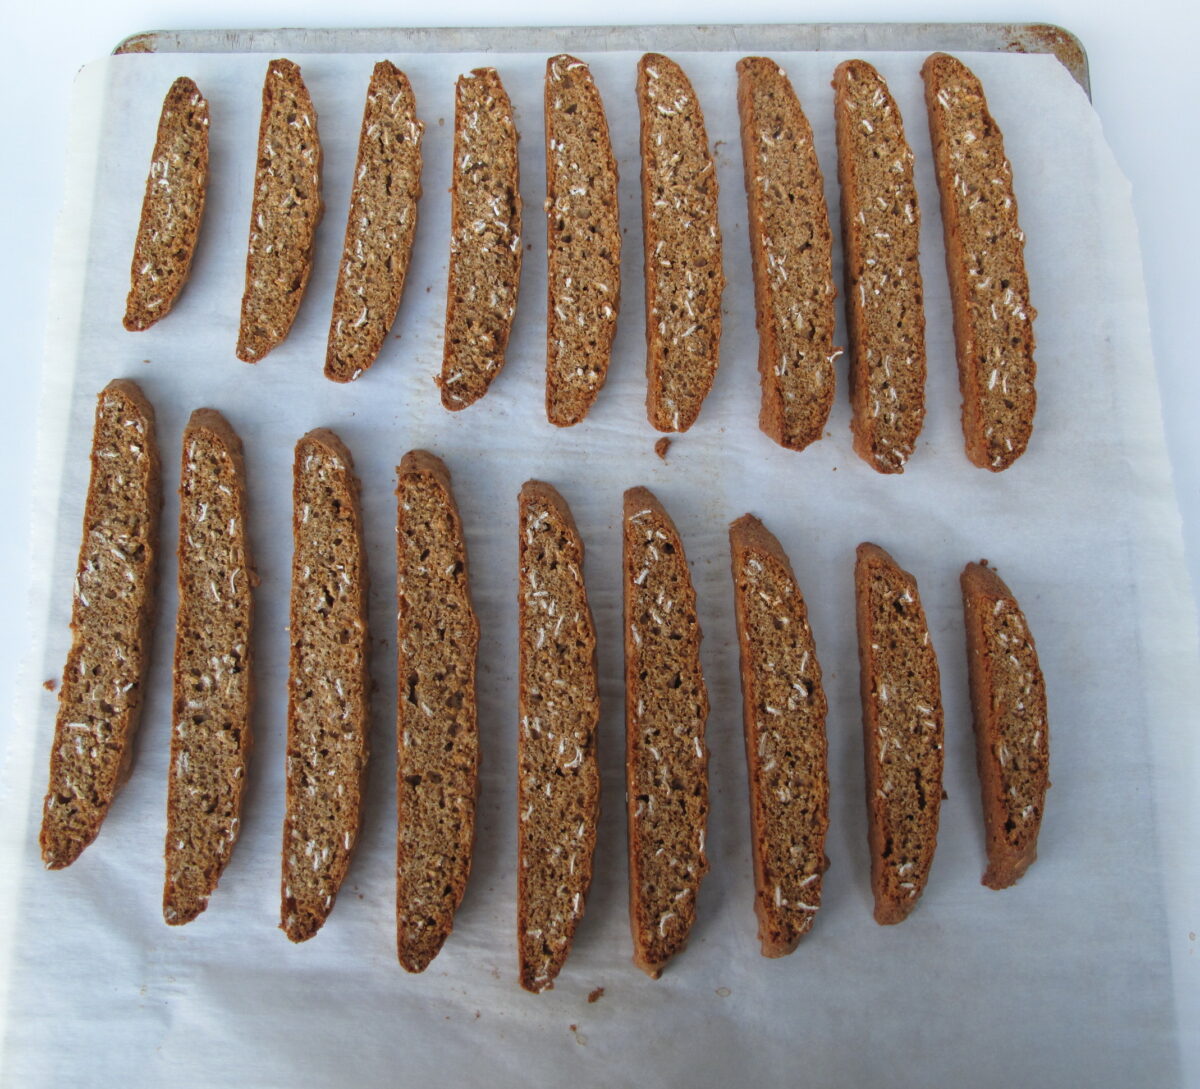 Sliced biscotti lying on cut edge on a parchment lined baking sheet.